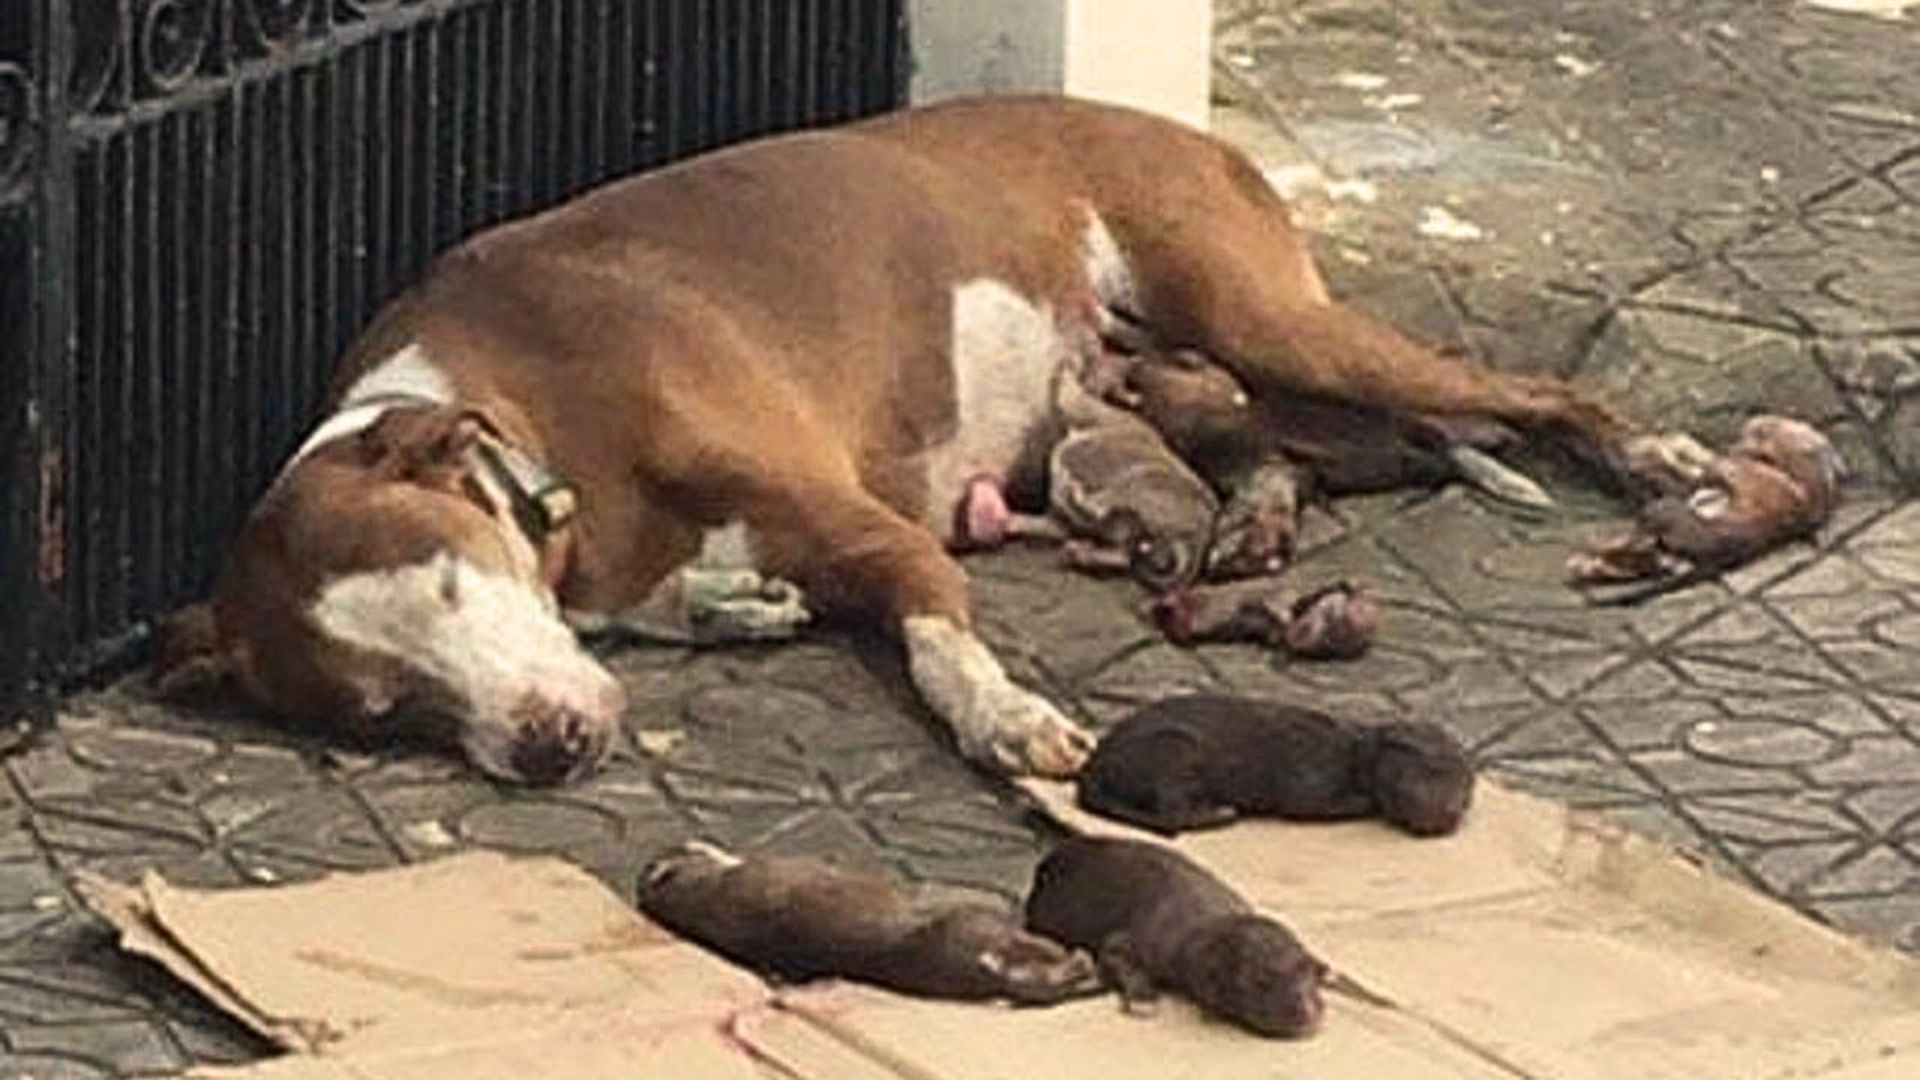 Exhausted Mom Dog Found Lying Helplessly Next To Her Newborn Puppies